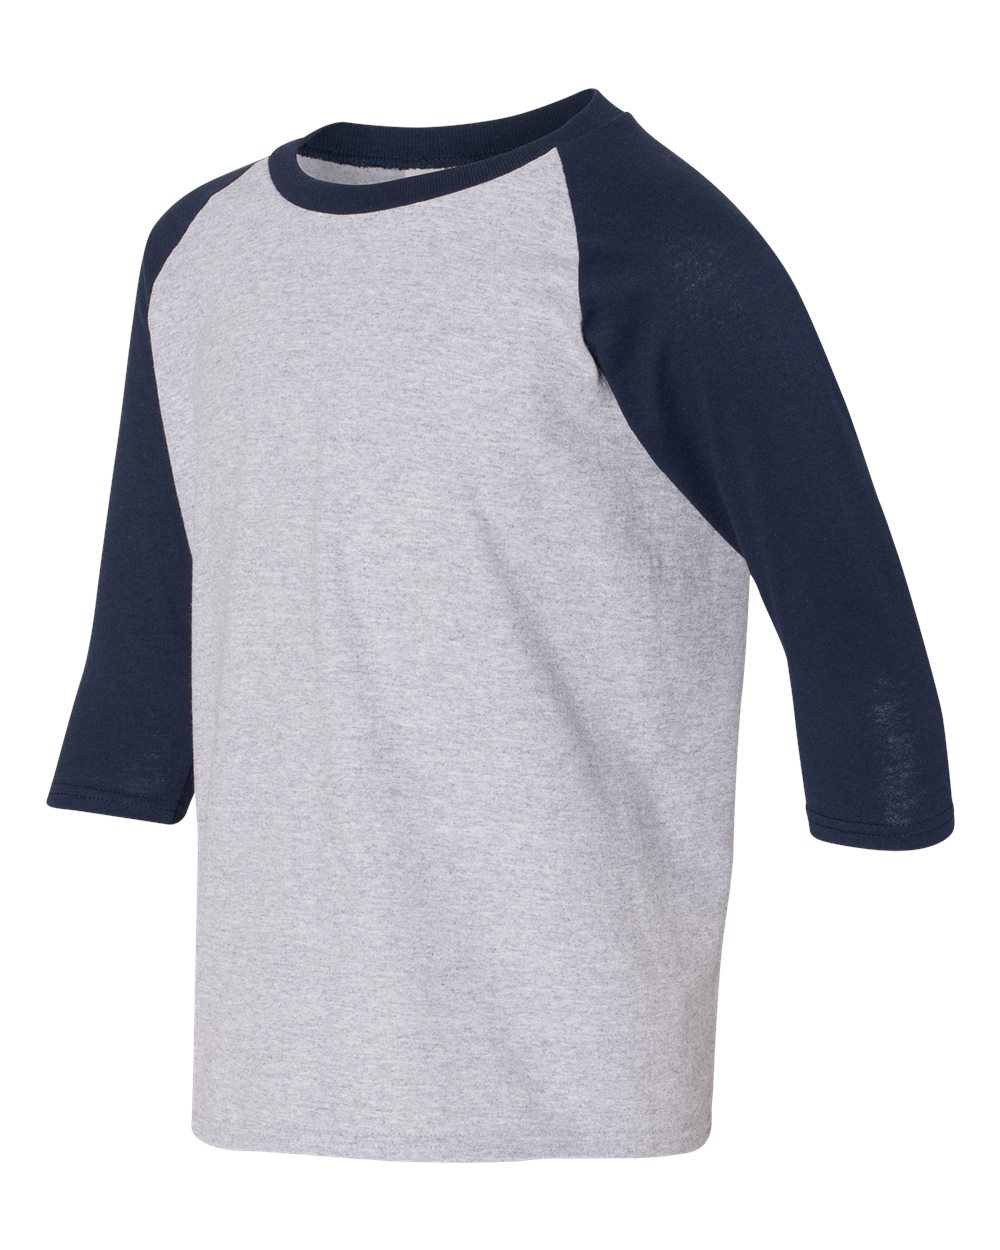 click to view Sport Grey/ Navy